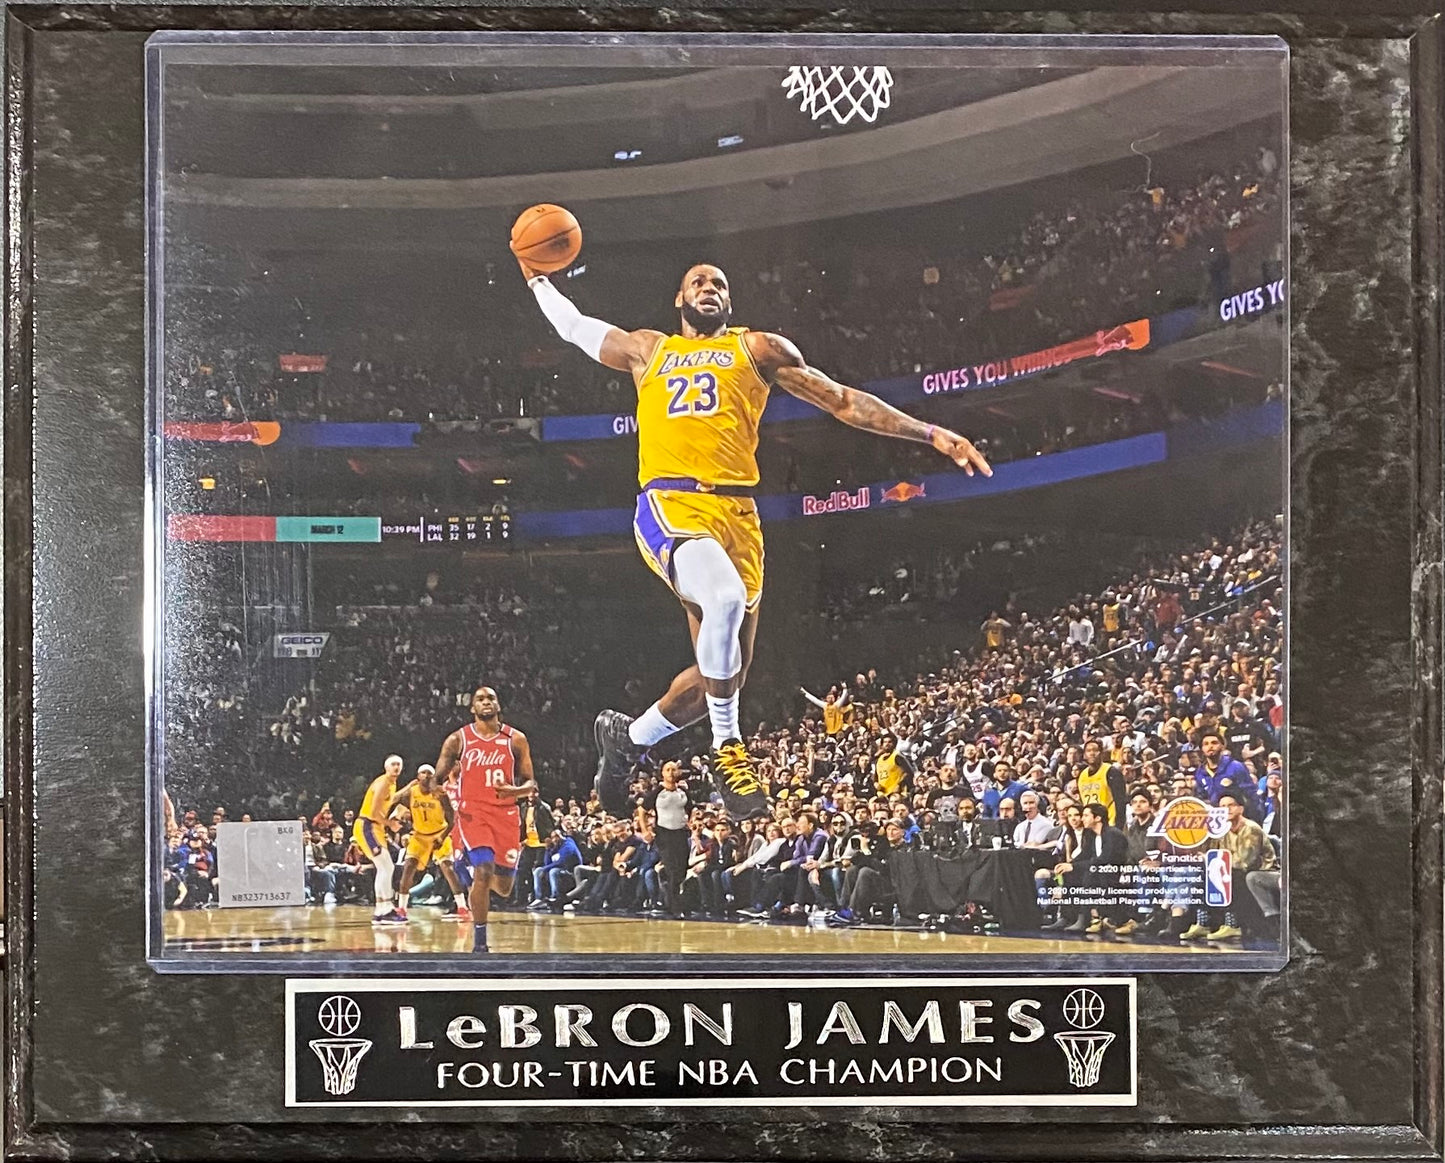 Lebron James Four Time NBA Champion Los Angeles Lakers Player Wall Plaque